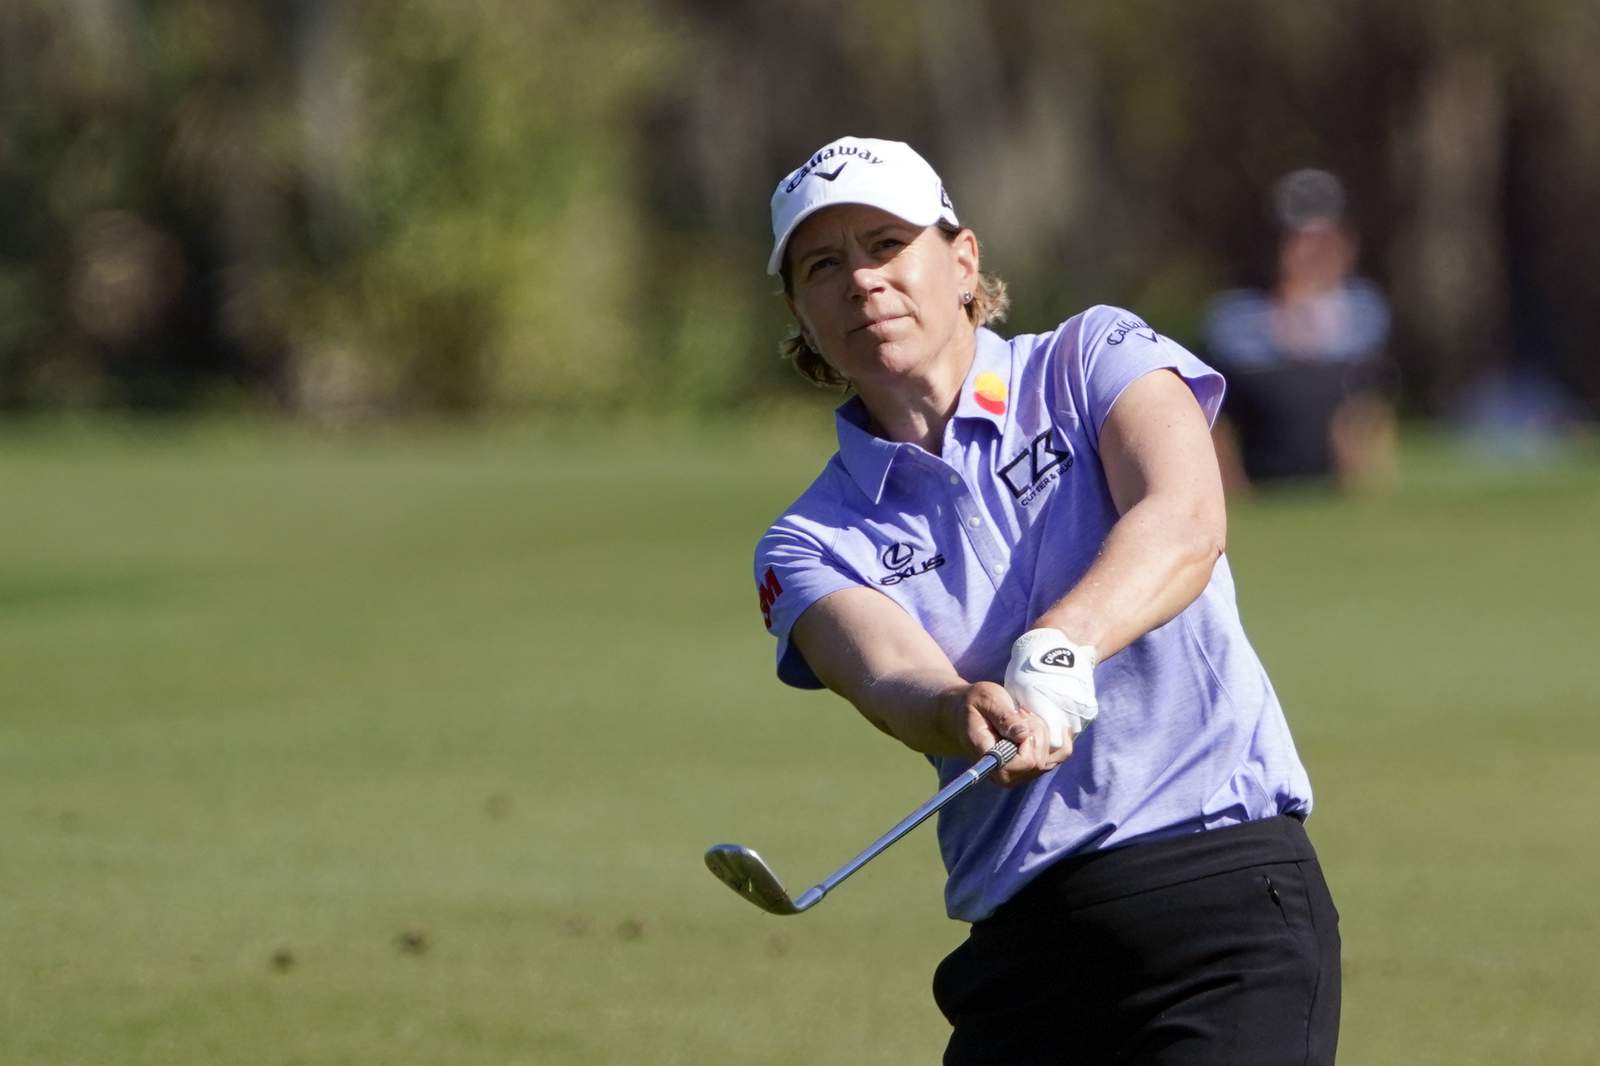 Sorenstam waiting to see if rules mistake costs her the cut